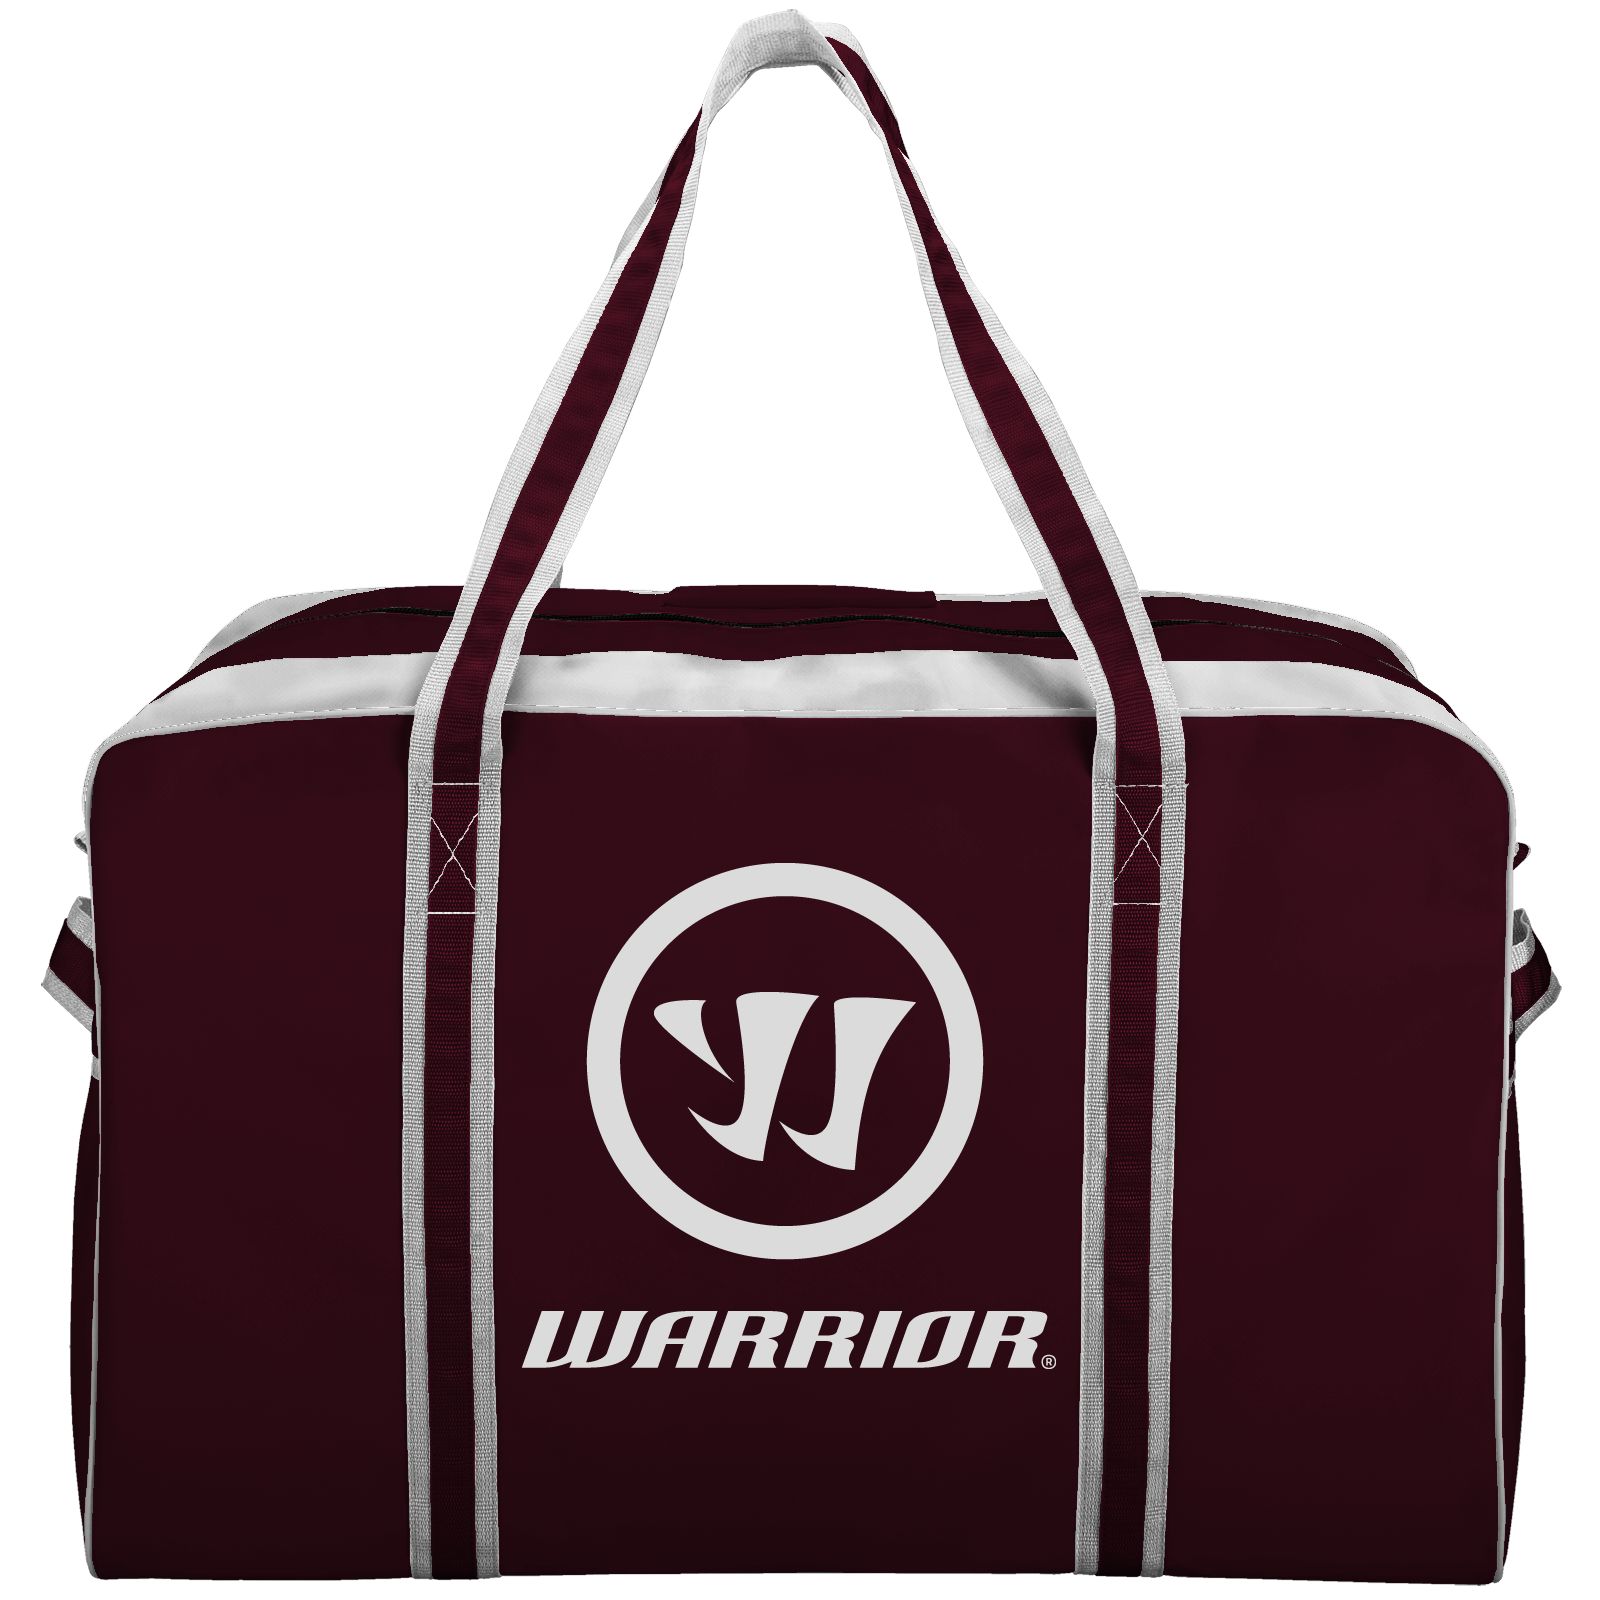 Warrior Pro Bag, Maroon with White image number 0